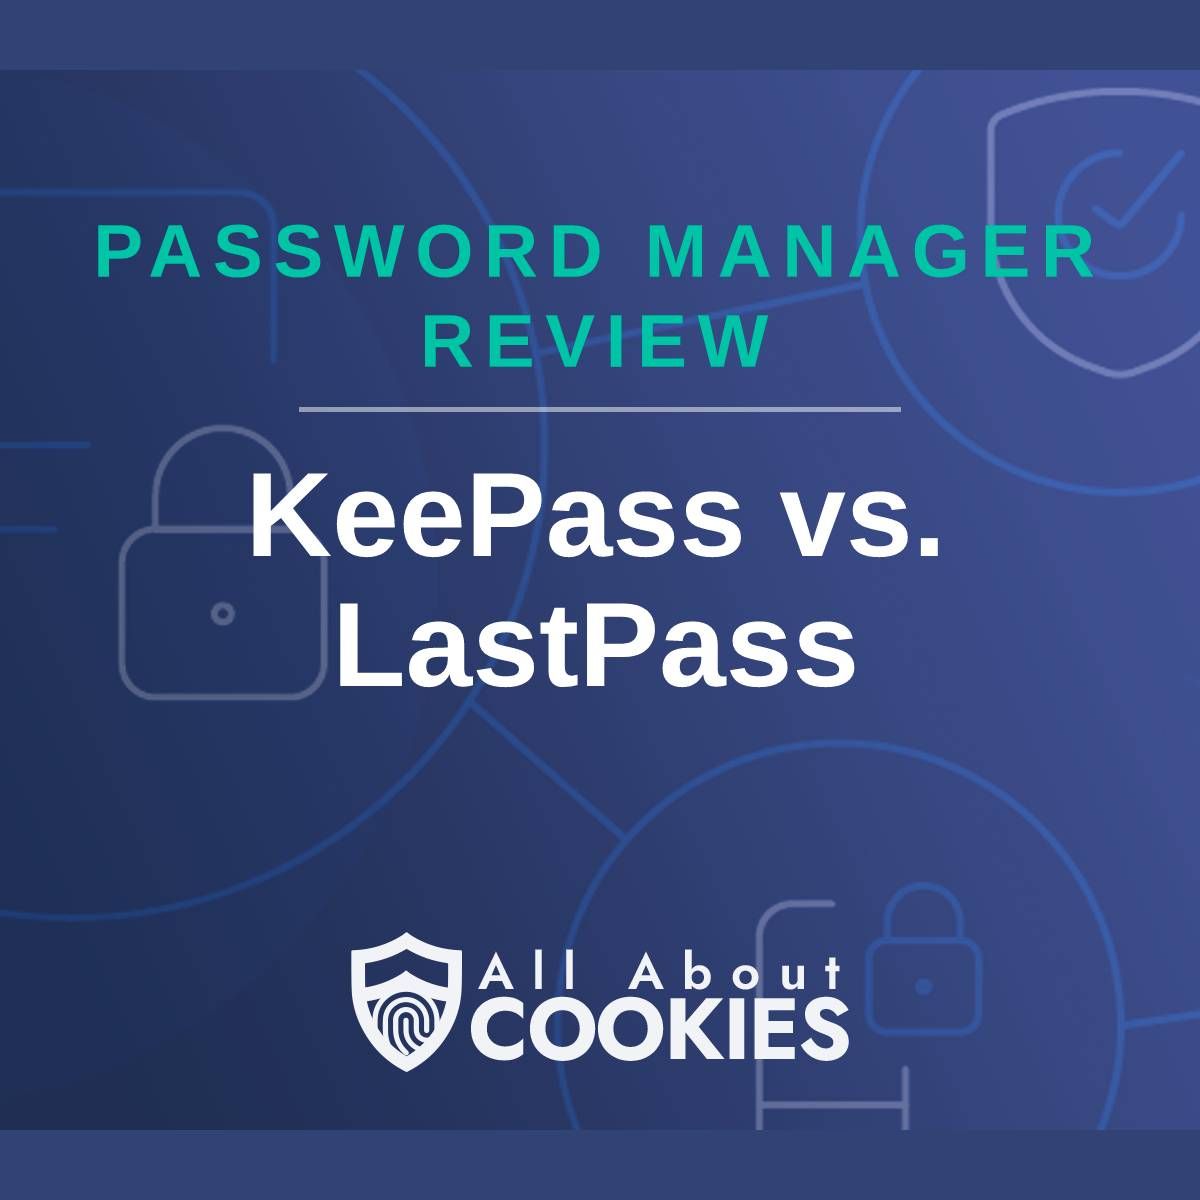 A blue background with images of locks and shields with the text &quot;Password Manager Review Keeper KeePass vs. LastPass&quot; and the All About Cookies logo. 